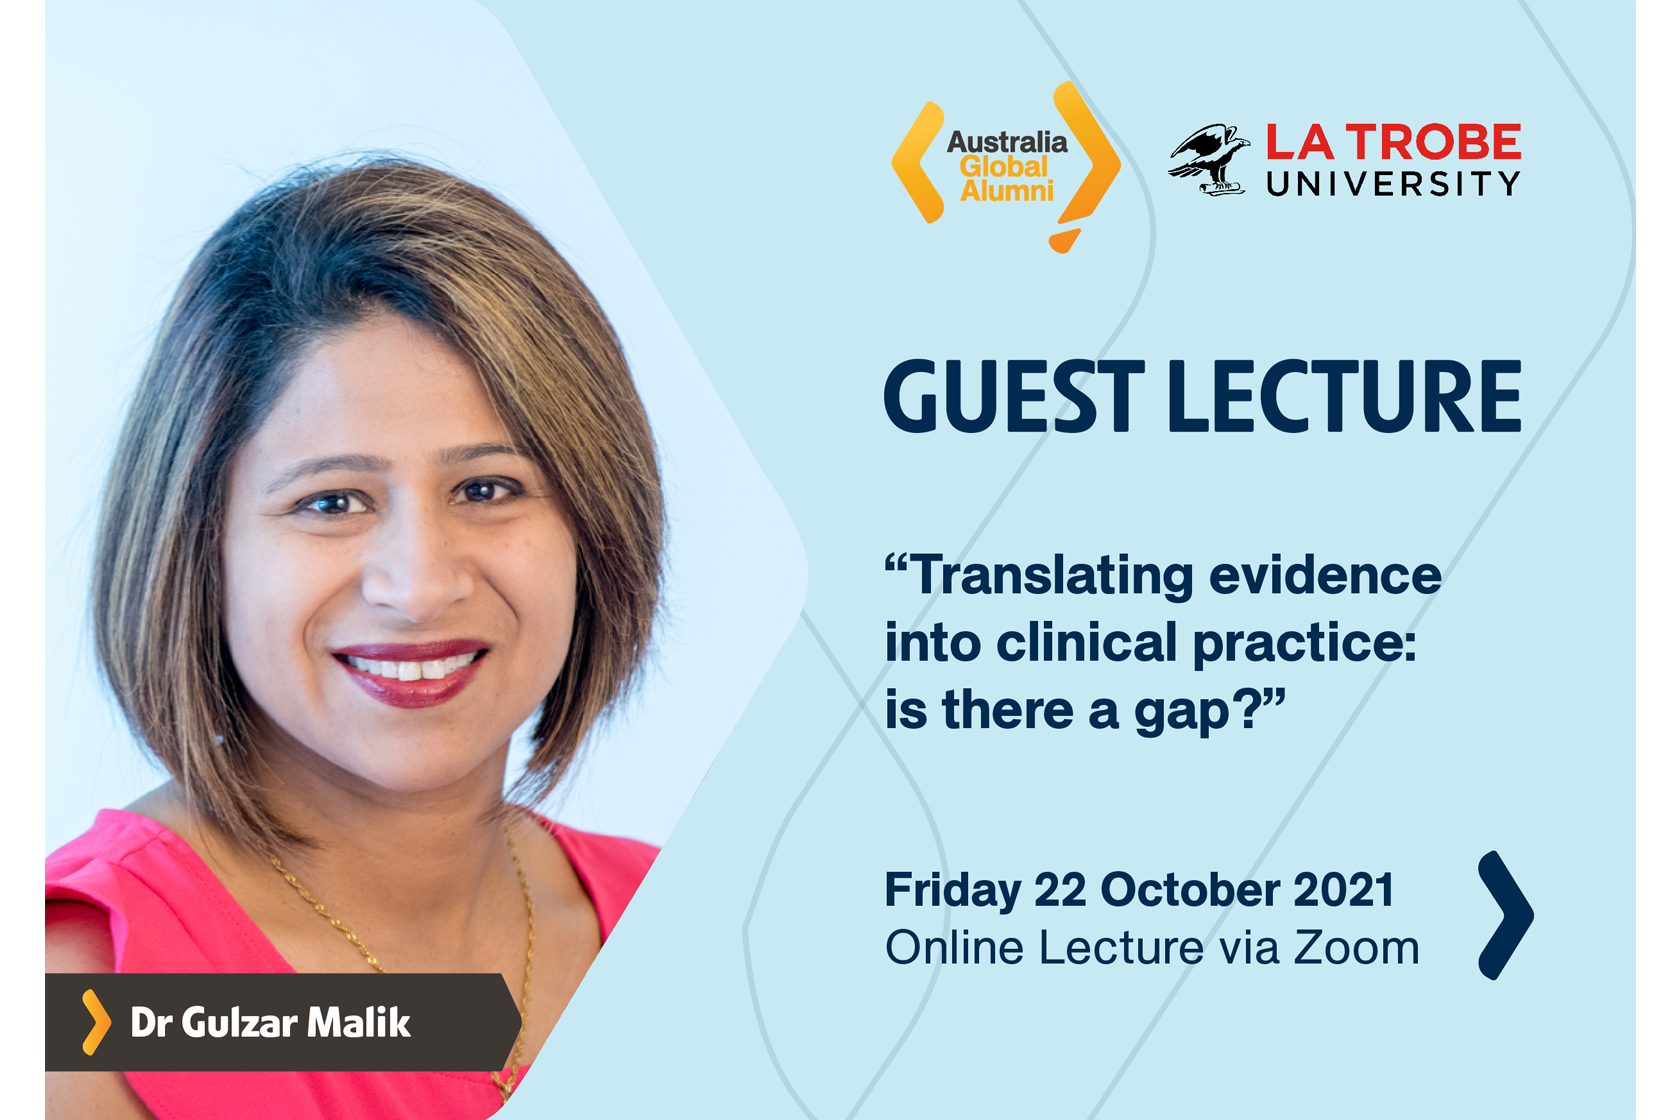 Let’s Join Our Online Lecture on “Translating evidence into clinical practice: is there a gap?”